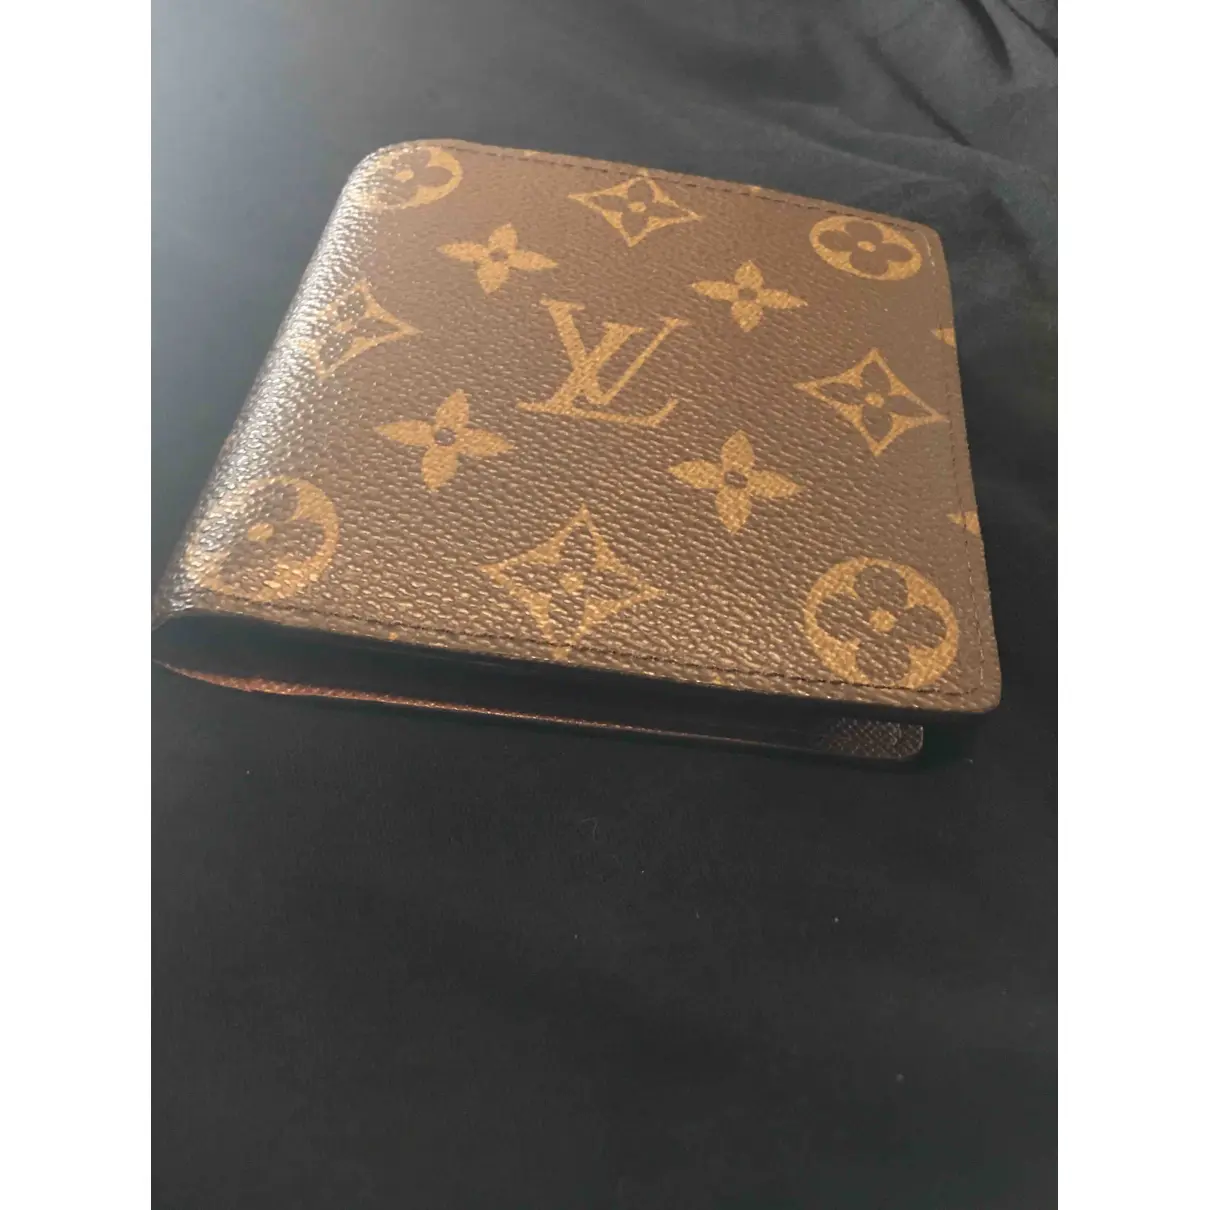 Buy Louis Vuitton Marco cloth small bag online